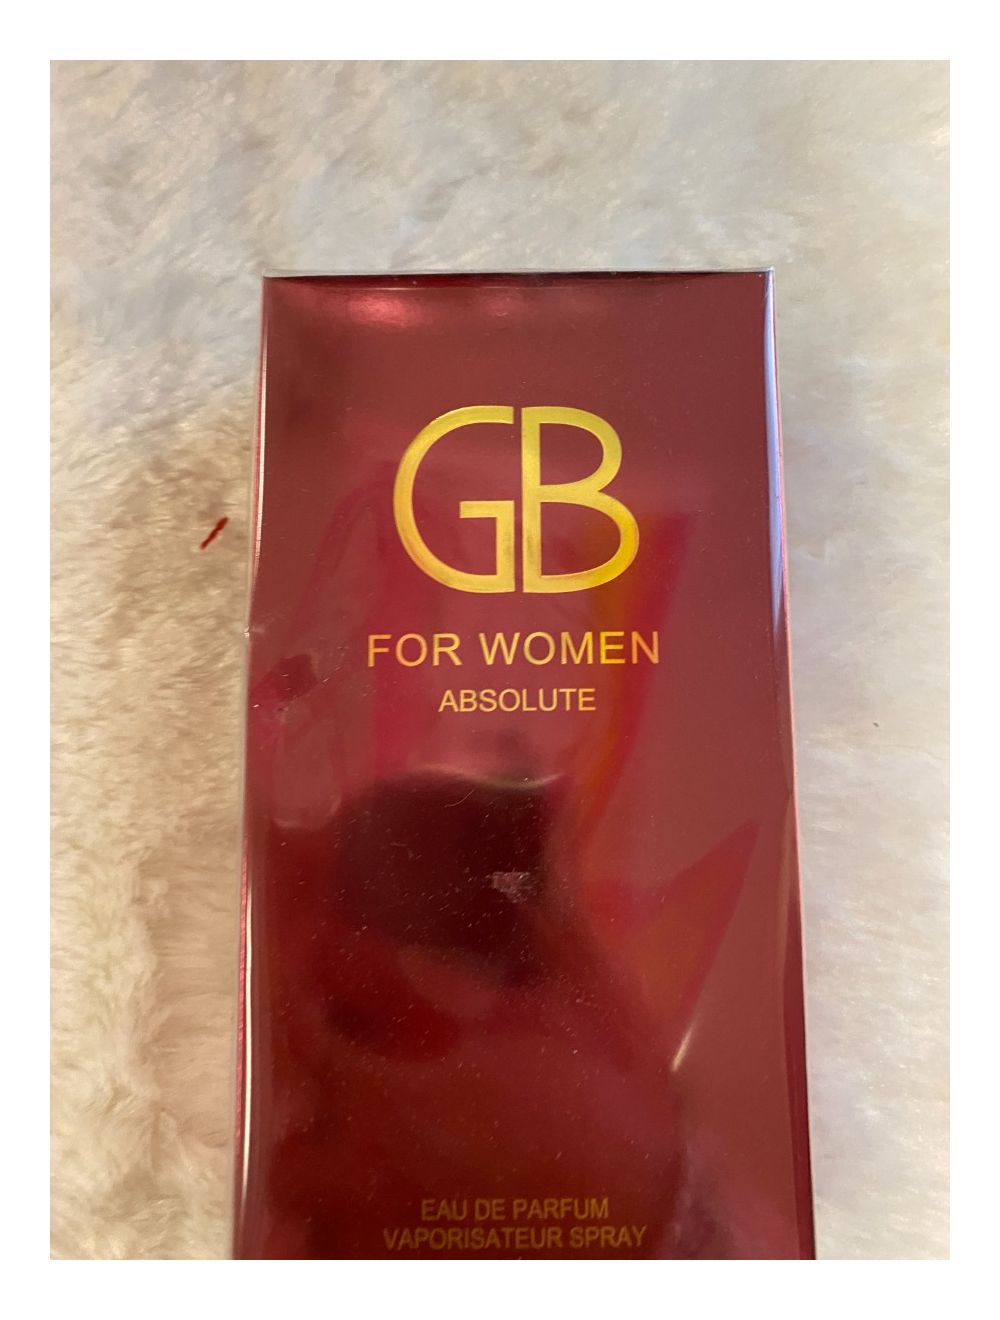 GB FOR WOMEN ABSOLUTE PERFUME - 100 ML.